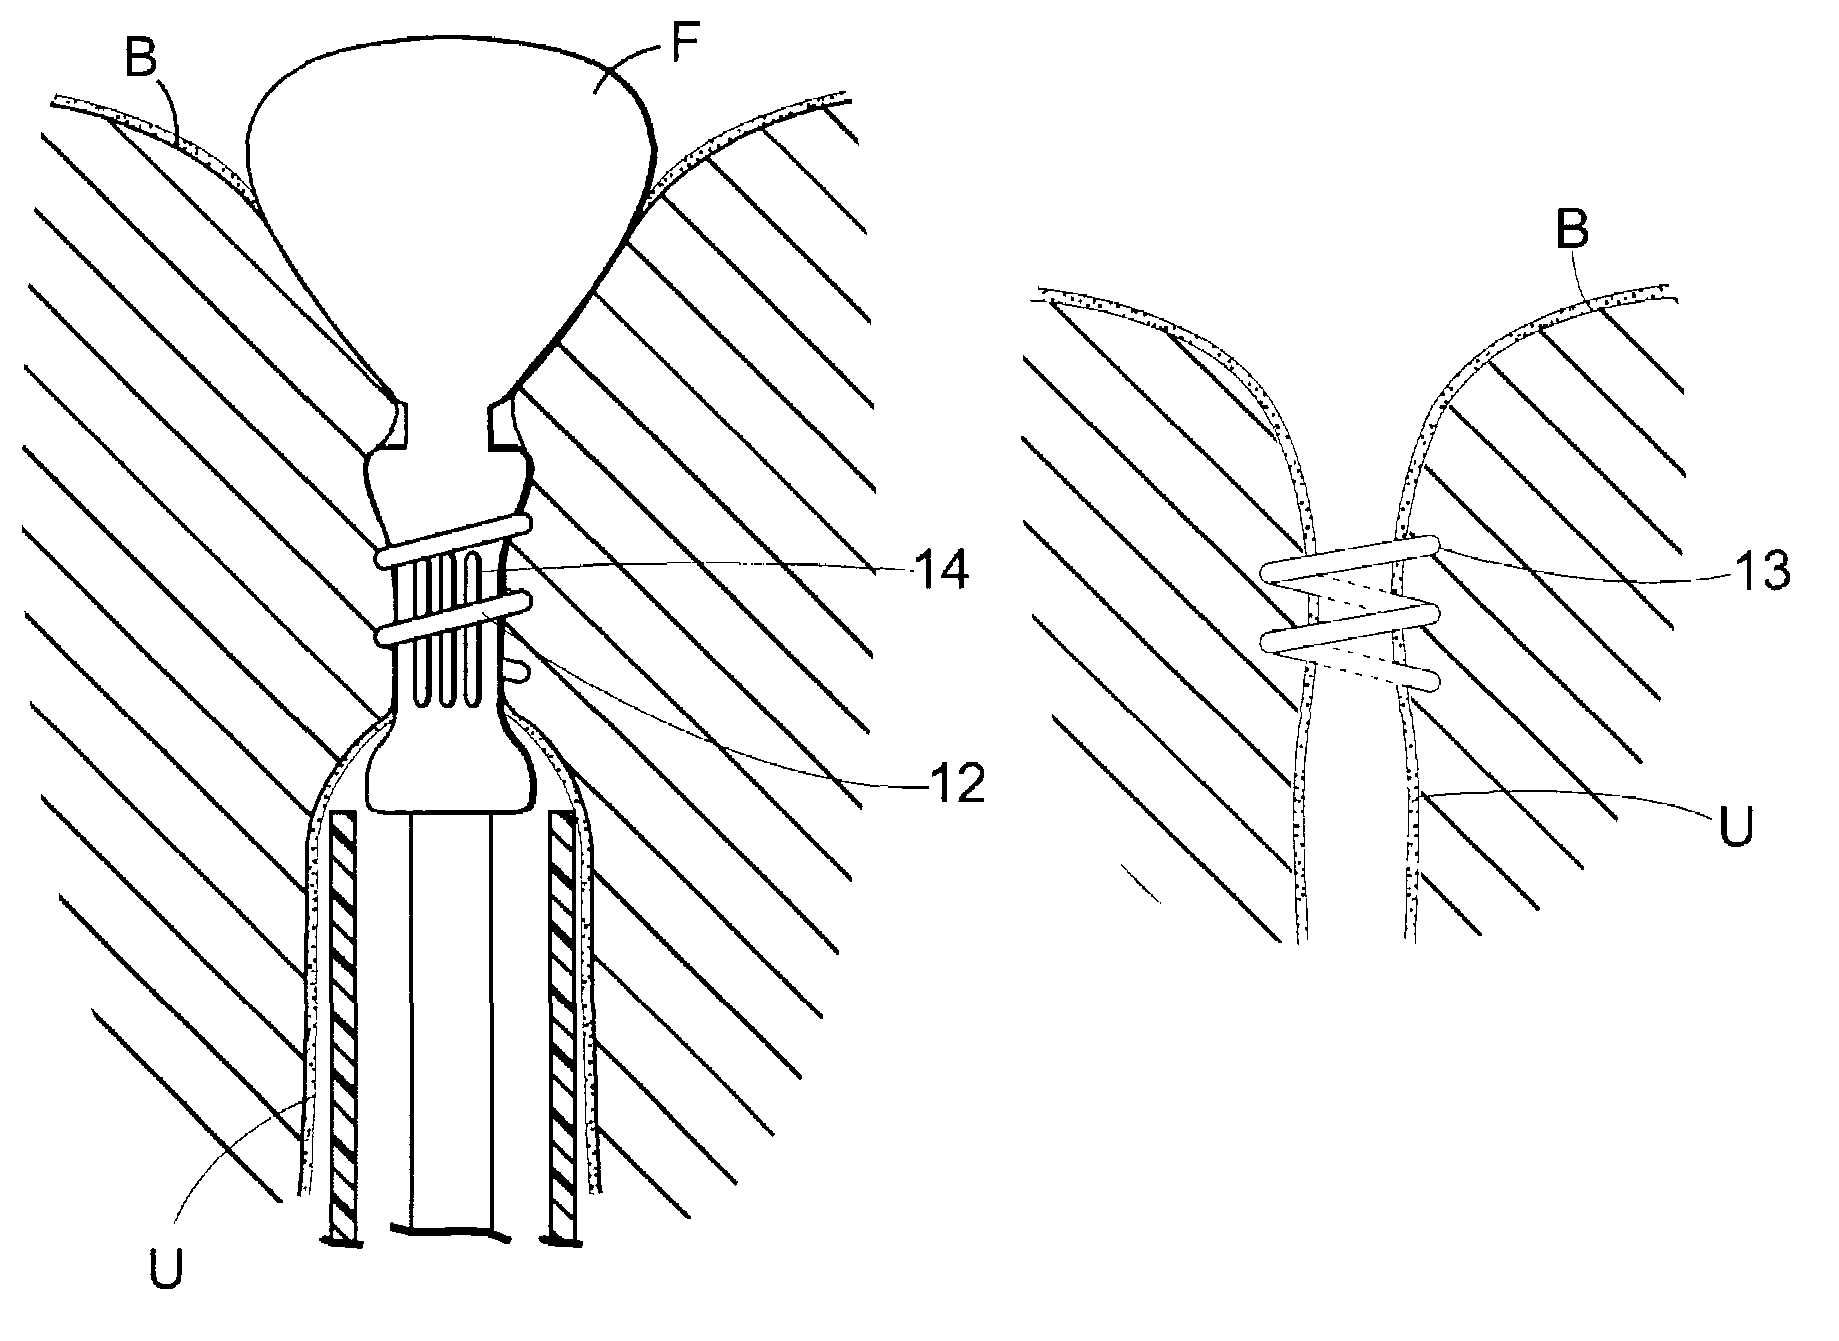 Surgical articles for placing an implant about a tubular tissue structure and methods